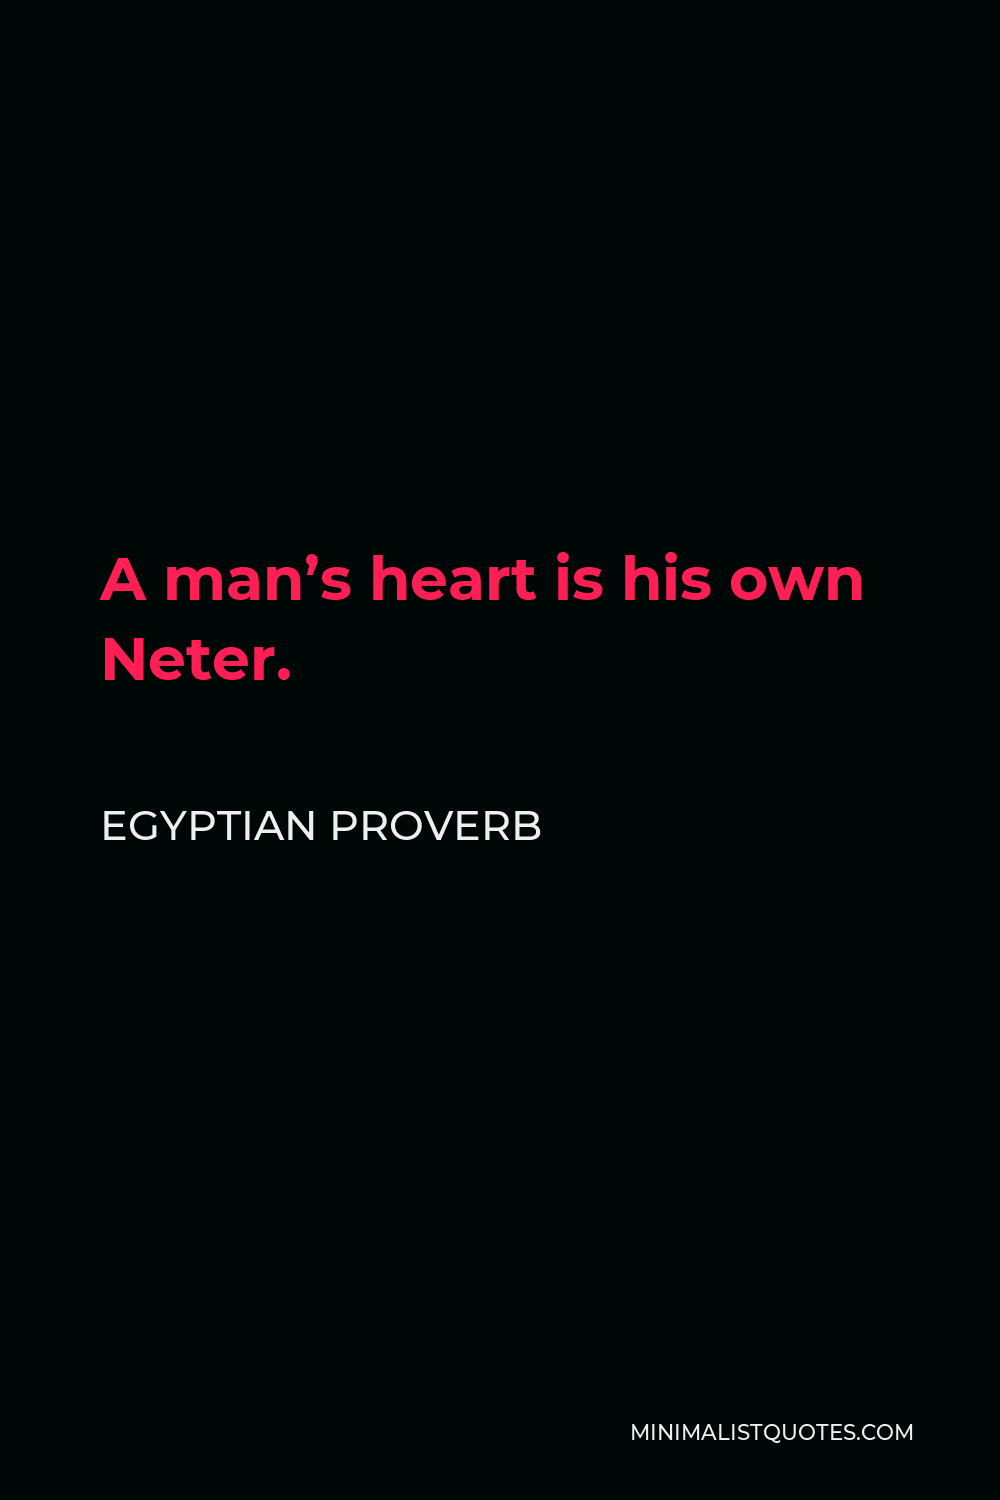 Egyptian Proverb Quote - A man’s heart is his own Neter.